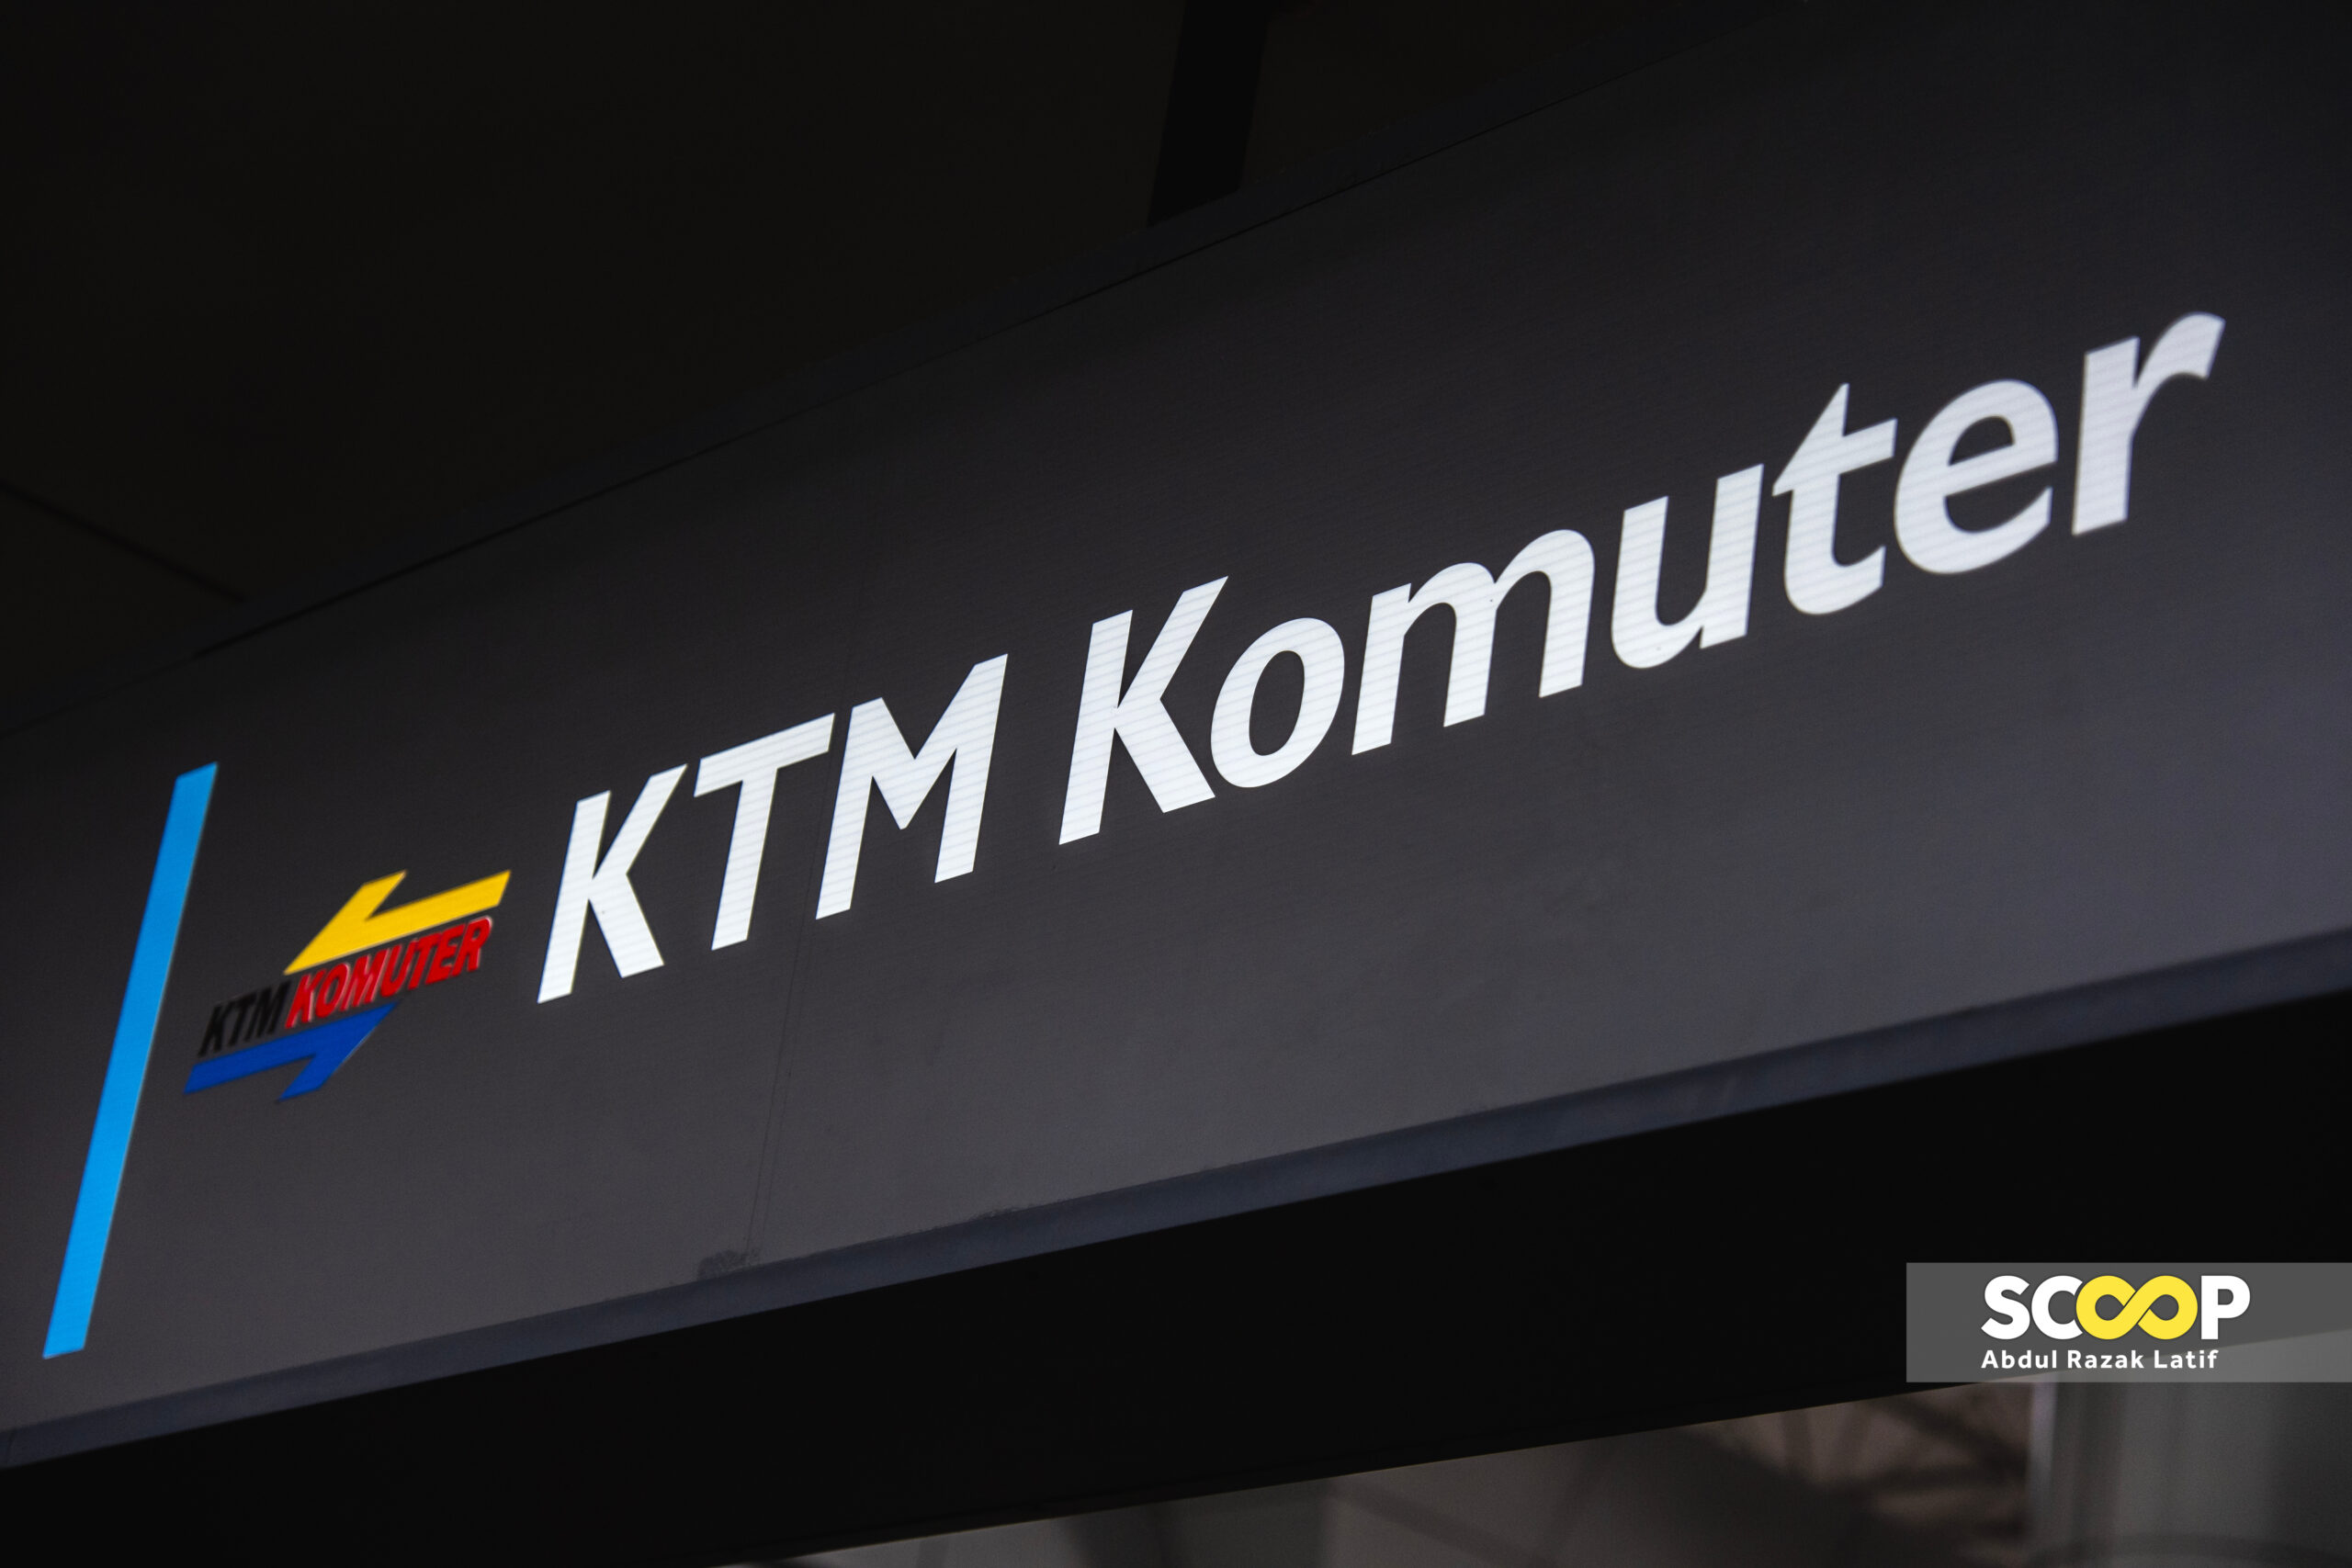 Transport Ministry plans Komuter service to support RTS Link